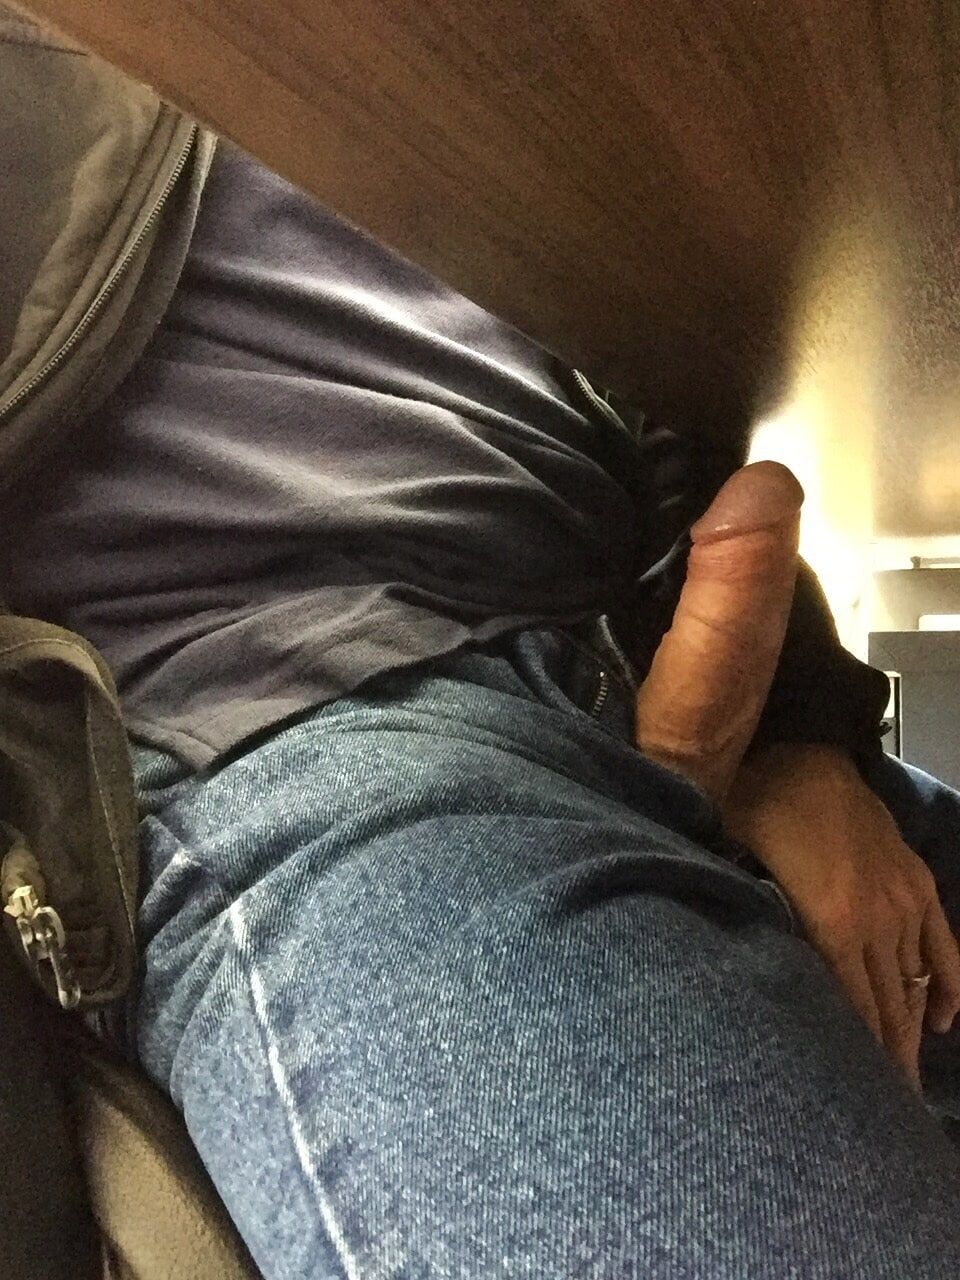 When you're stuck at work and horny as fuck #19